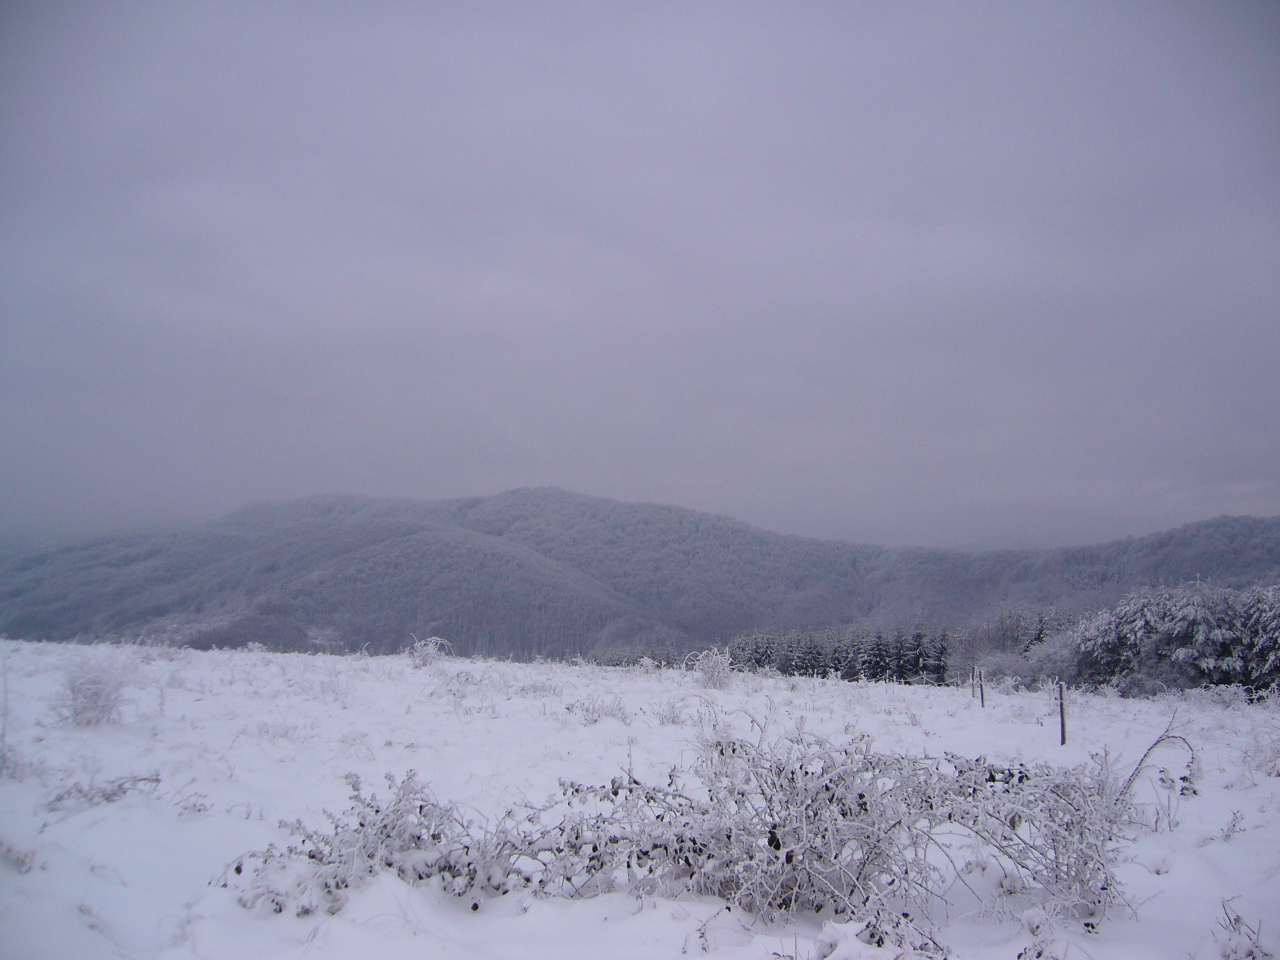 A PERSPECTIVE PIECE OF LAND 3100sq m FOR SALE 8km FROM GABROVO 500m FROM HOTEL 